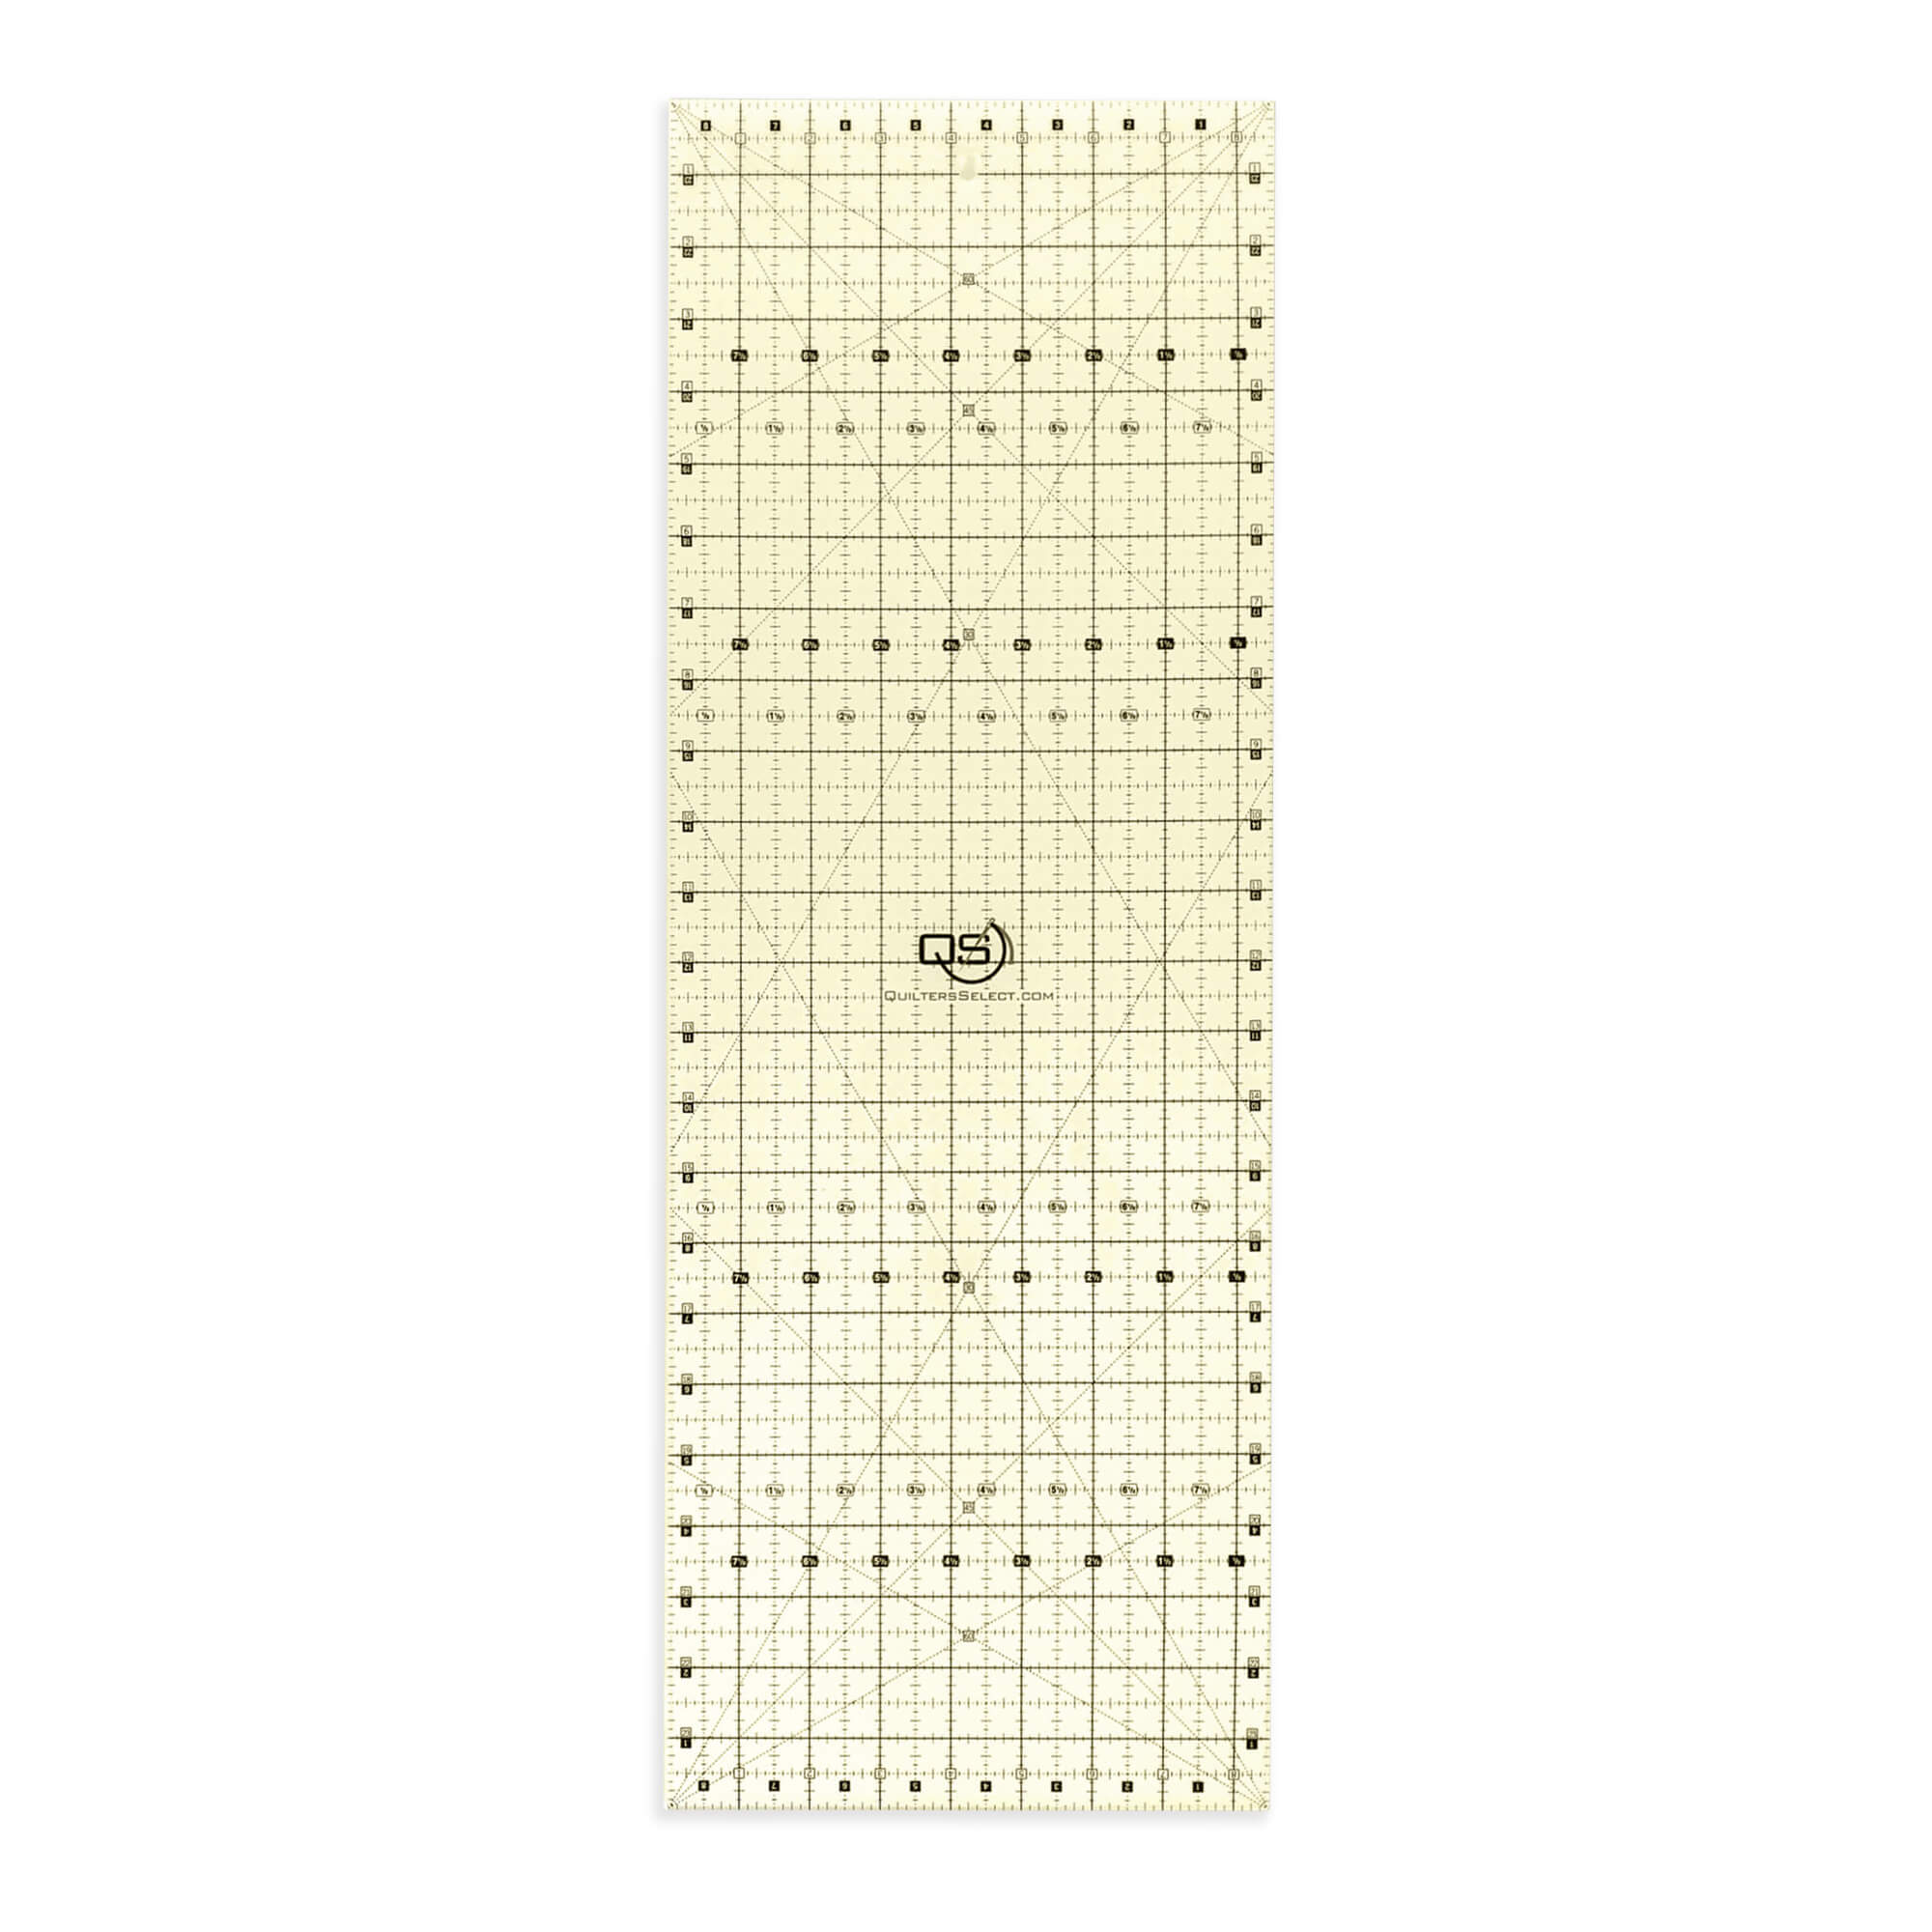 Ruler Quilter's Select - Non Slip Deluxe Quilting Ruler 4.5 X 4.5 QS RUL4.5  - 844050008681